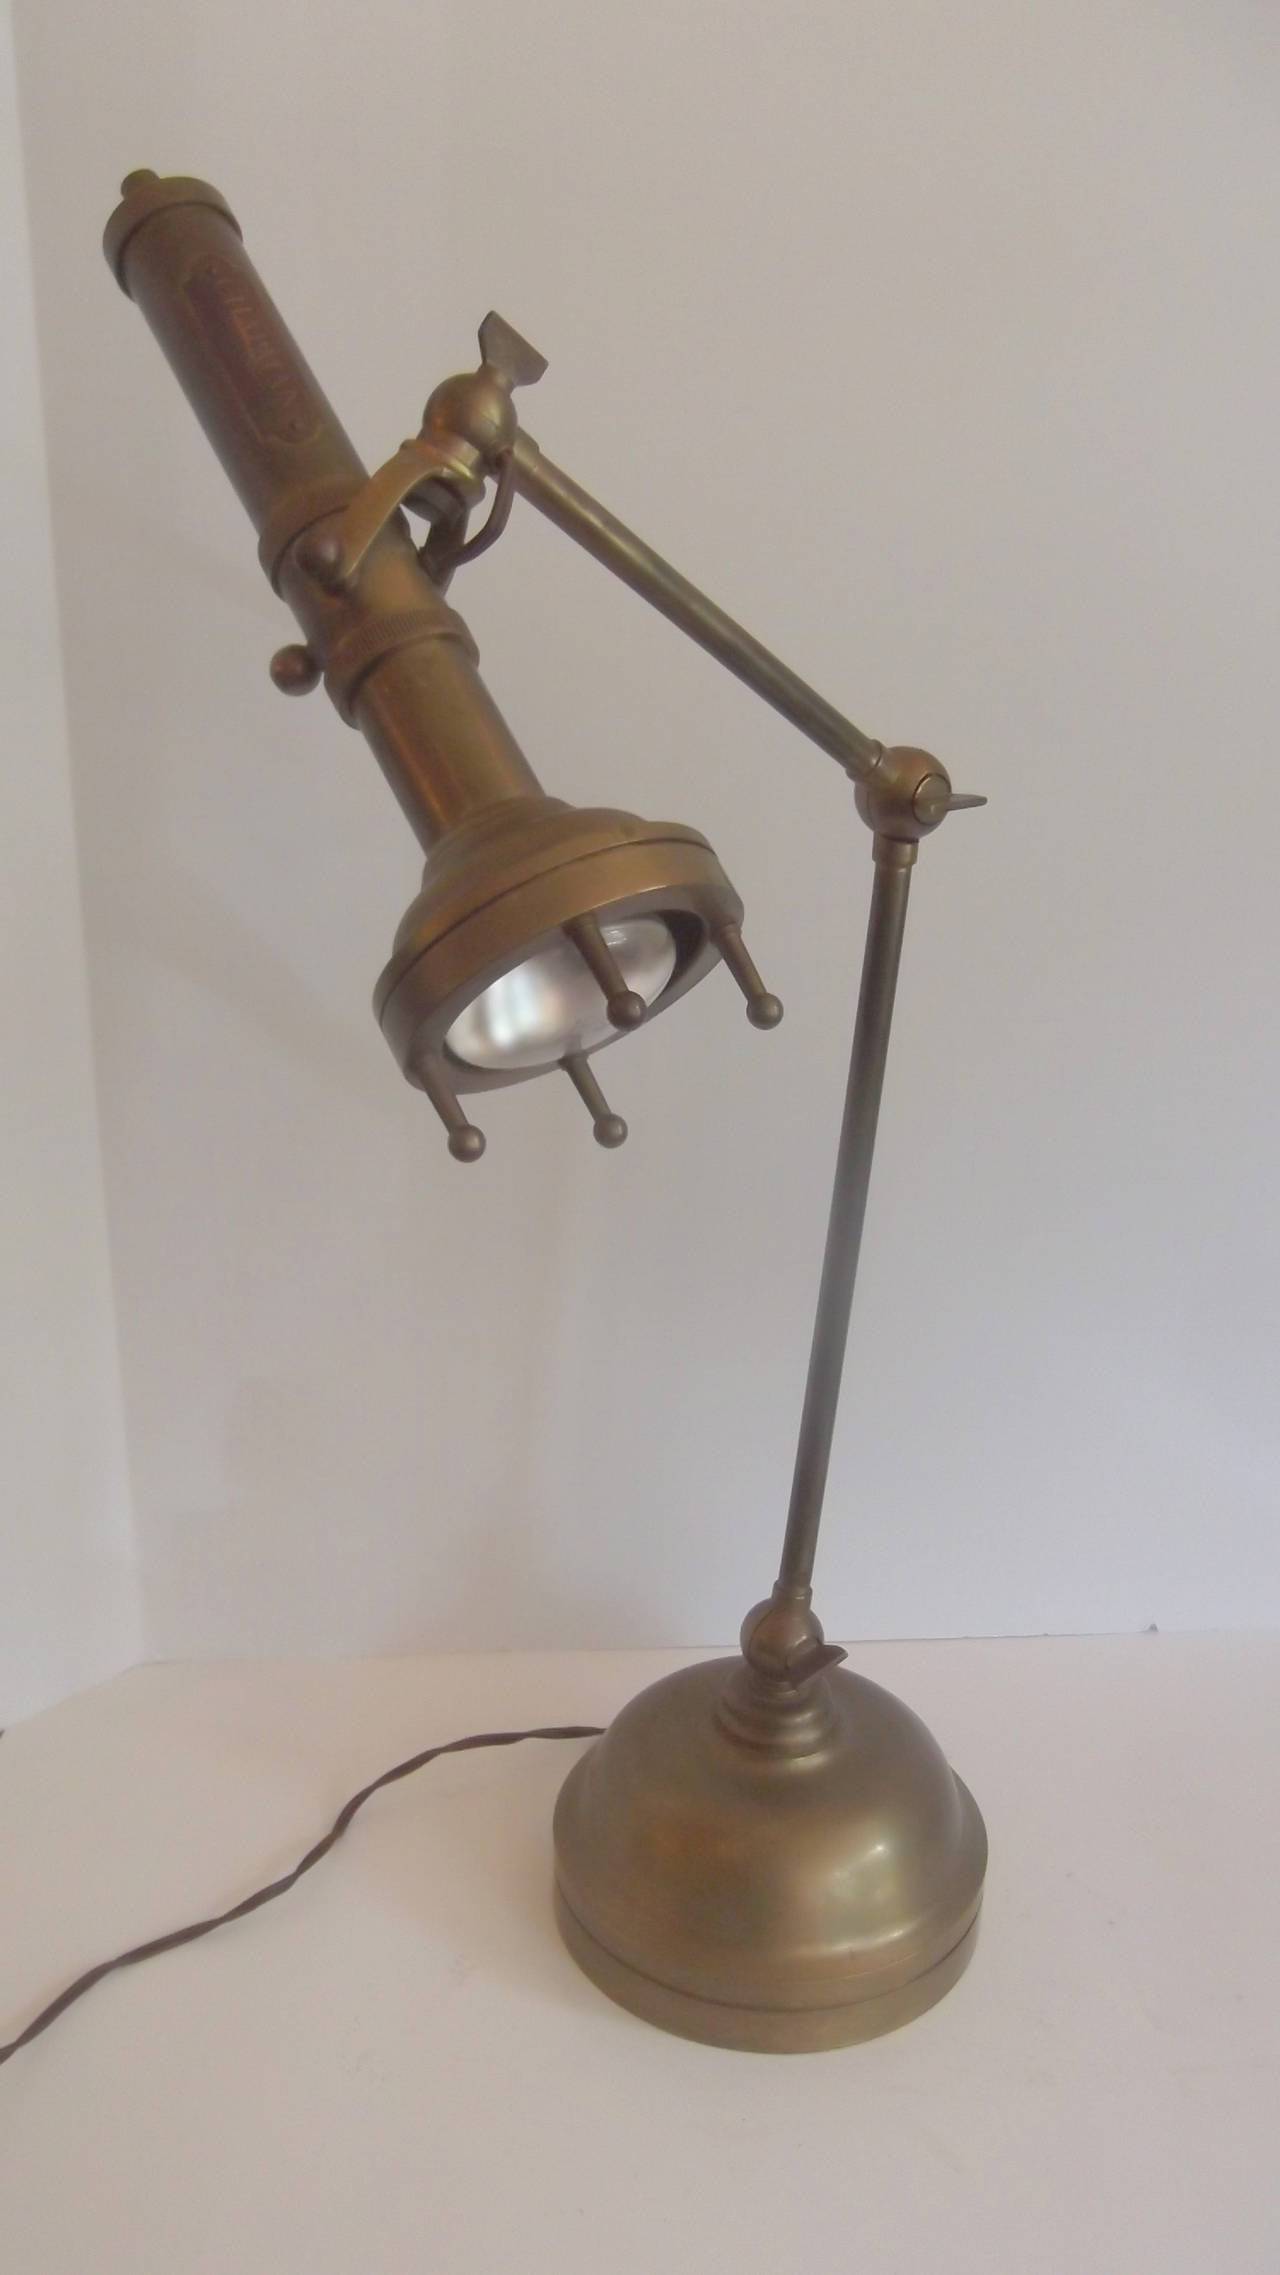 Chapman brass mid century desk lamp.  This model is referred to as the 